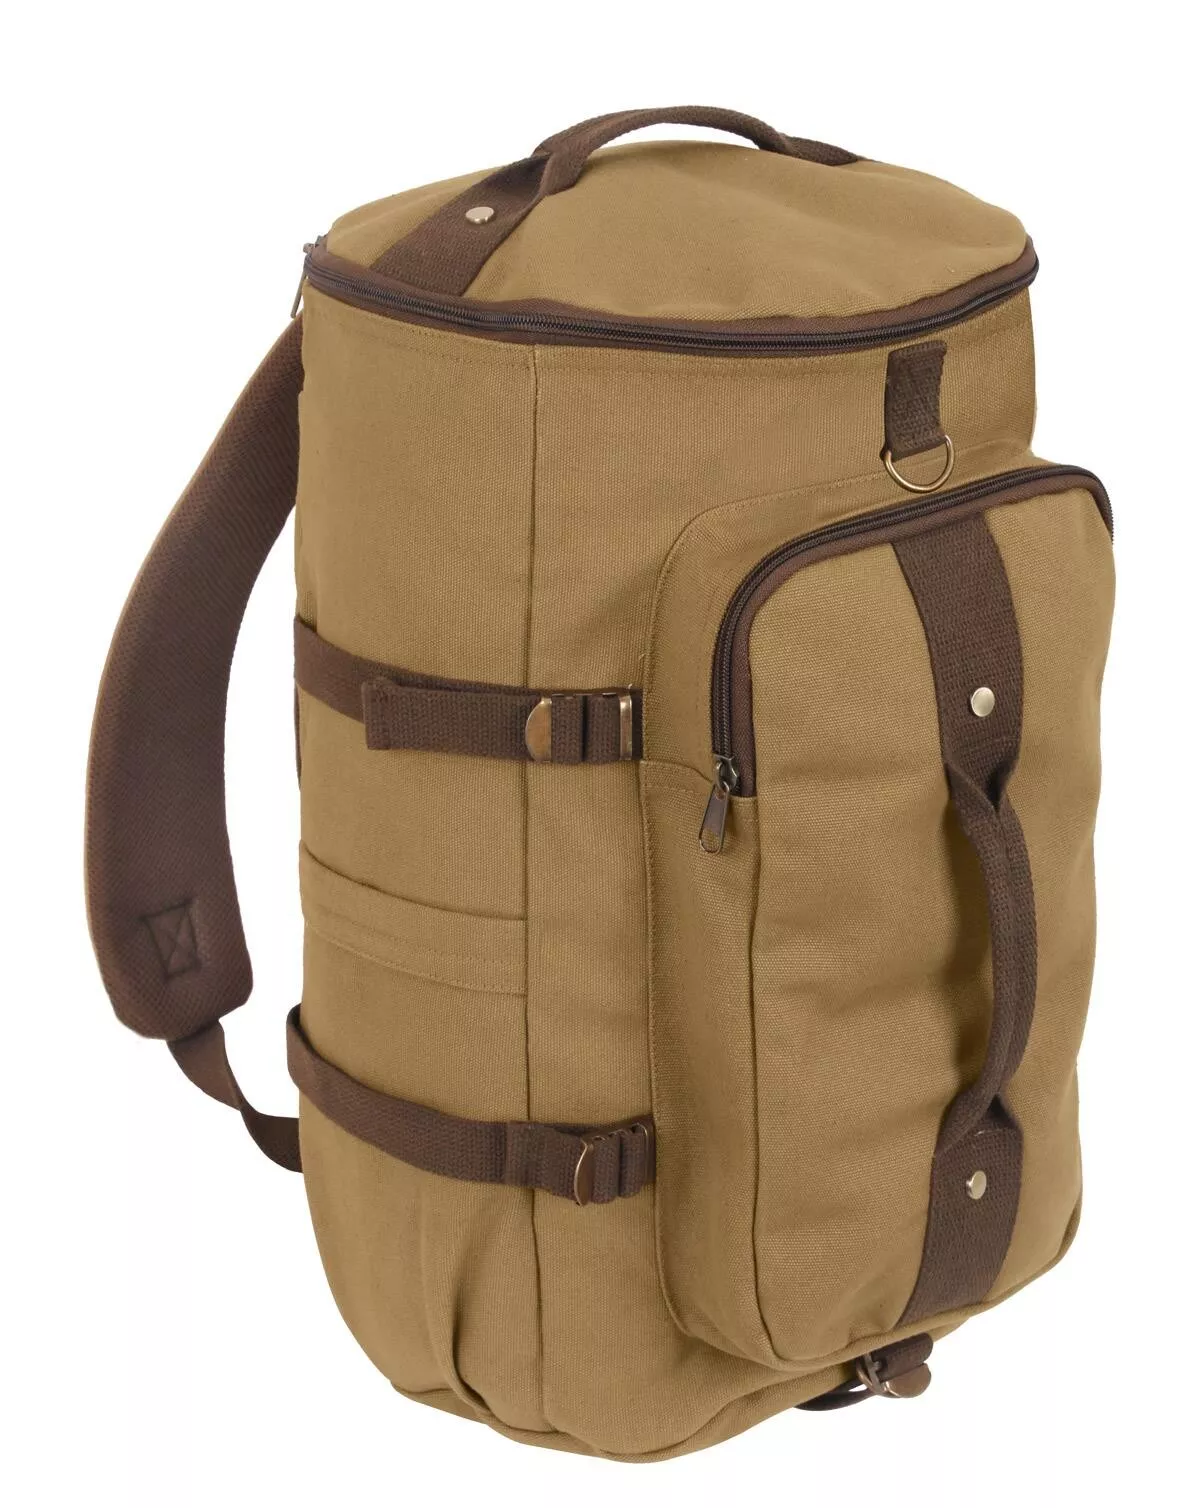 #1 - Rothco Convertible Canvas Duffle / Backpack (Coyote Brun, One Size)